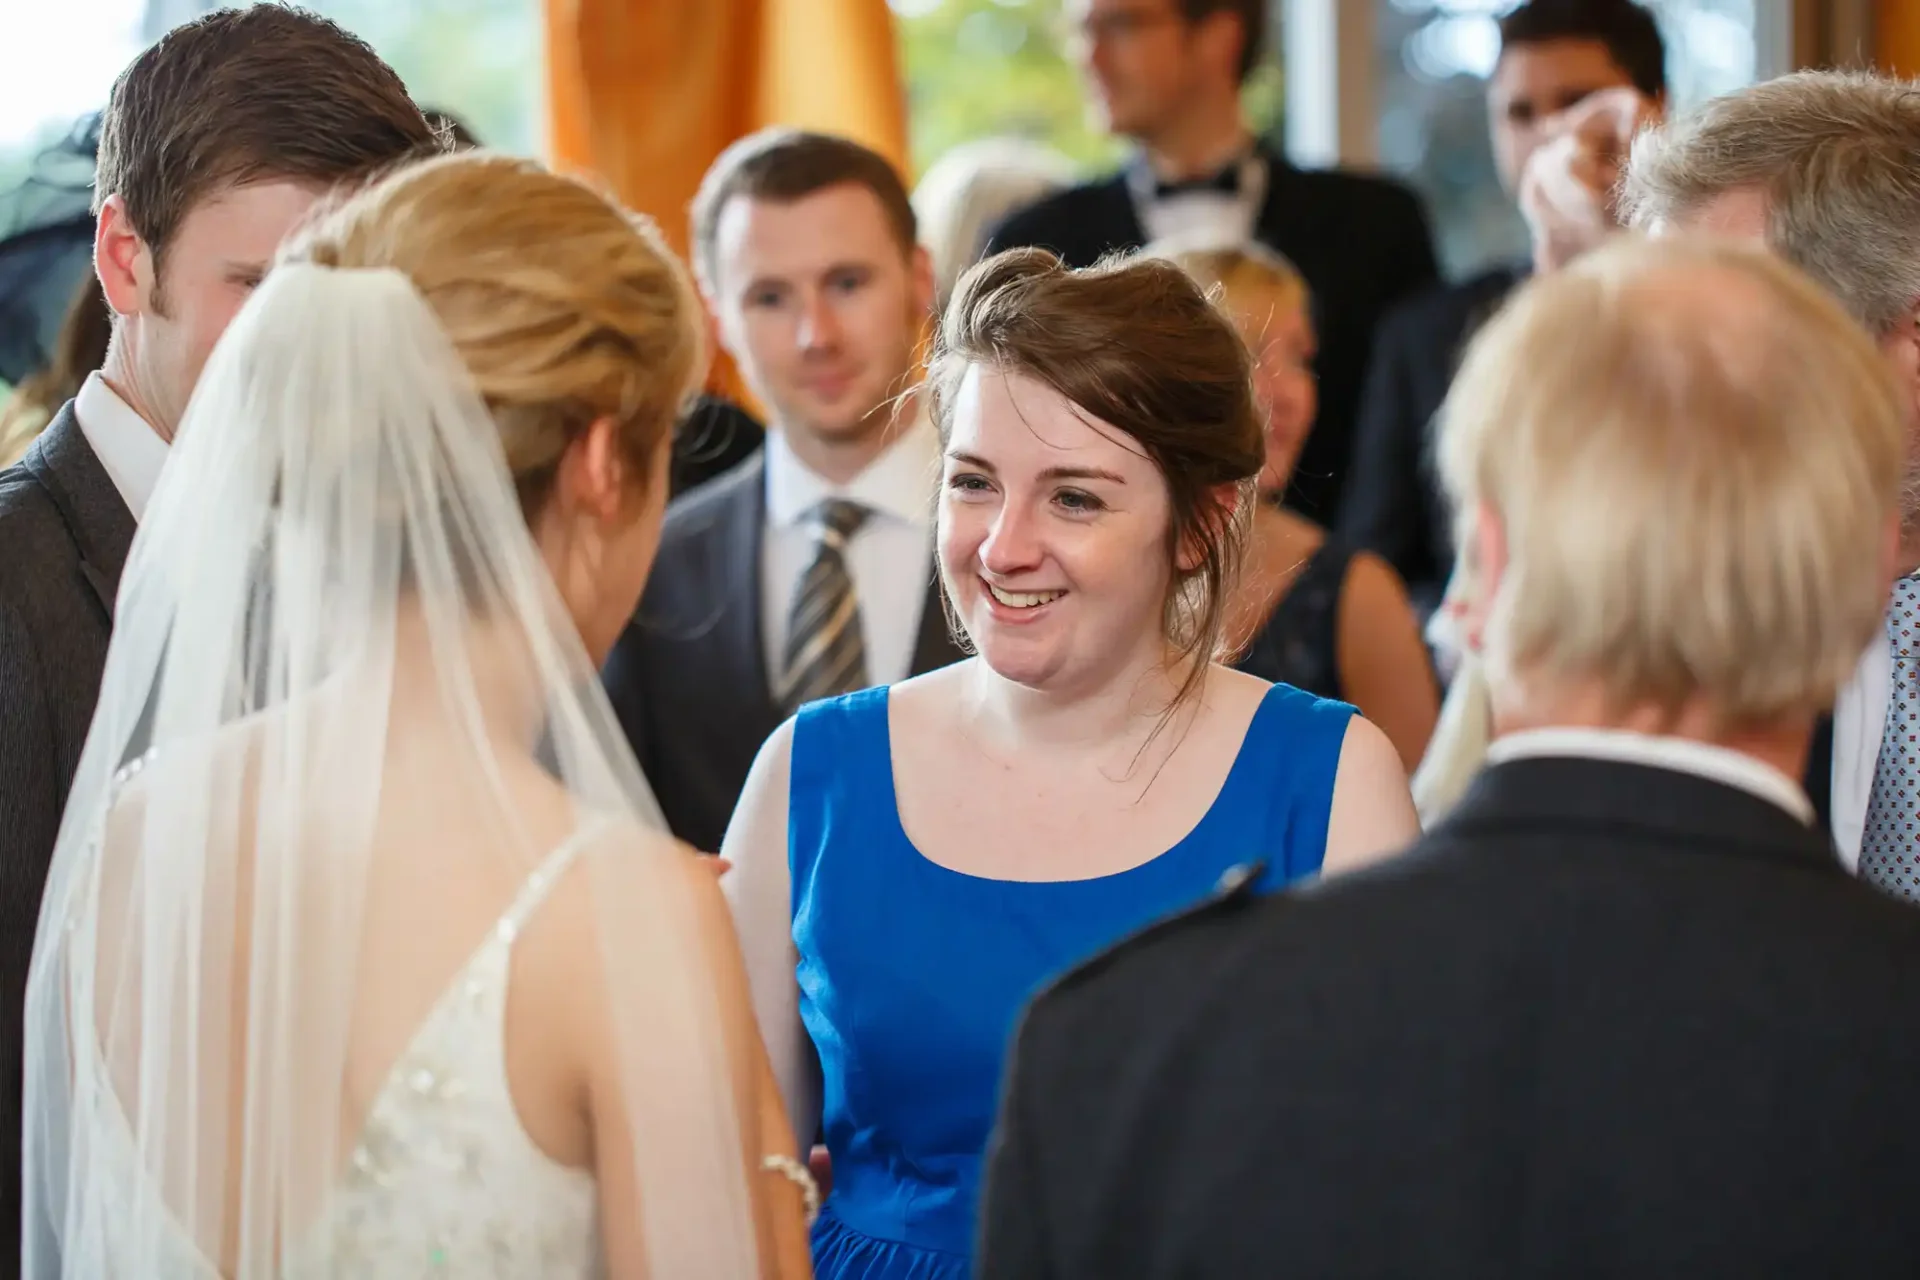 A woman in a blue dress smiling at a bride during a wedding ceremony, surrounded by guests.